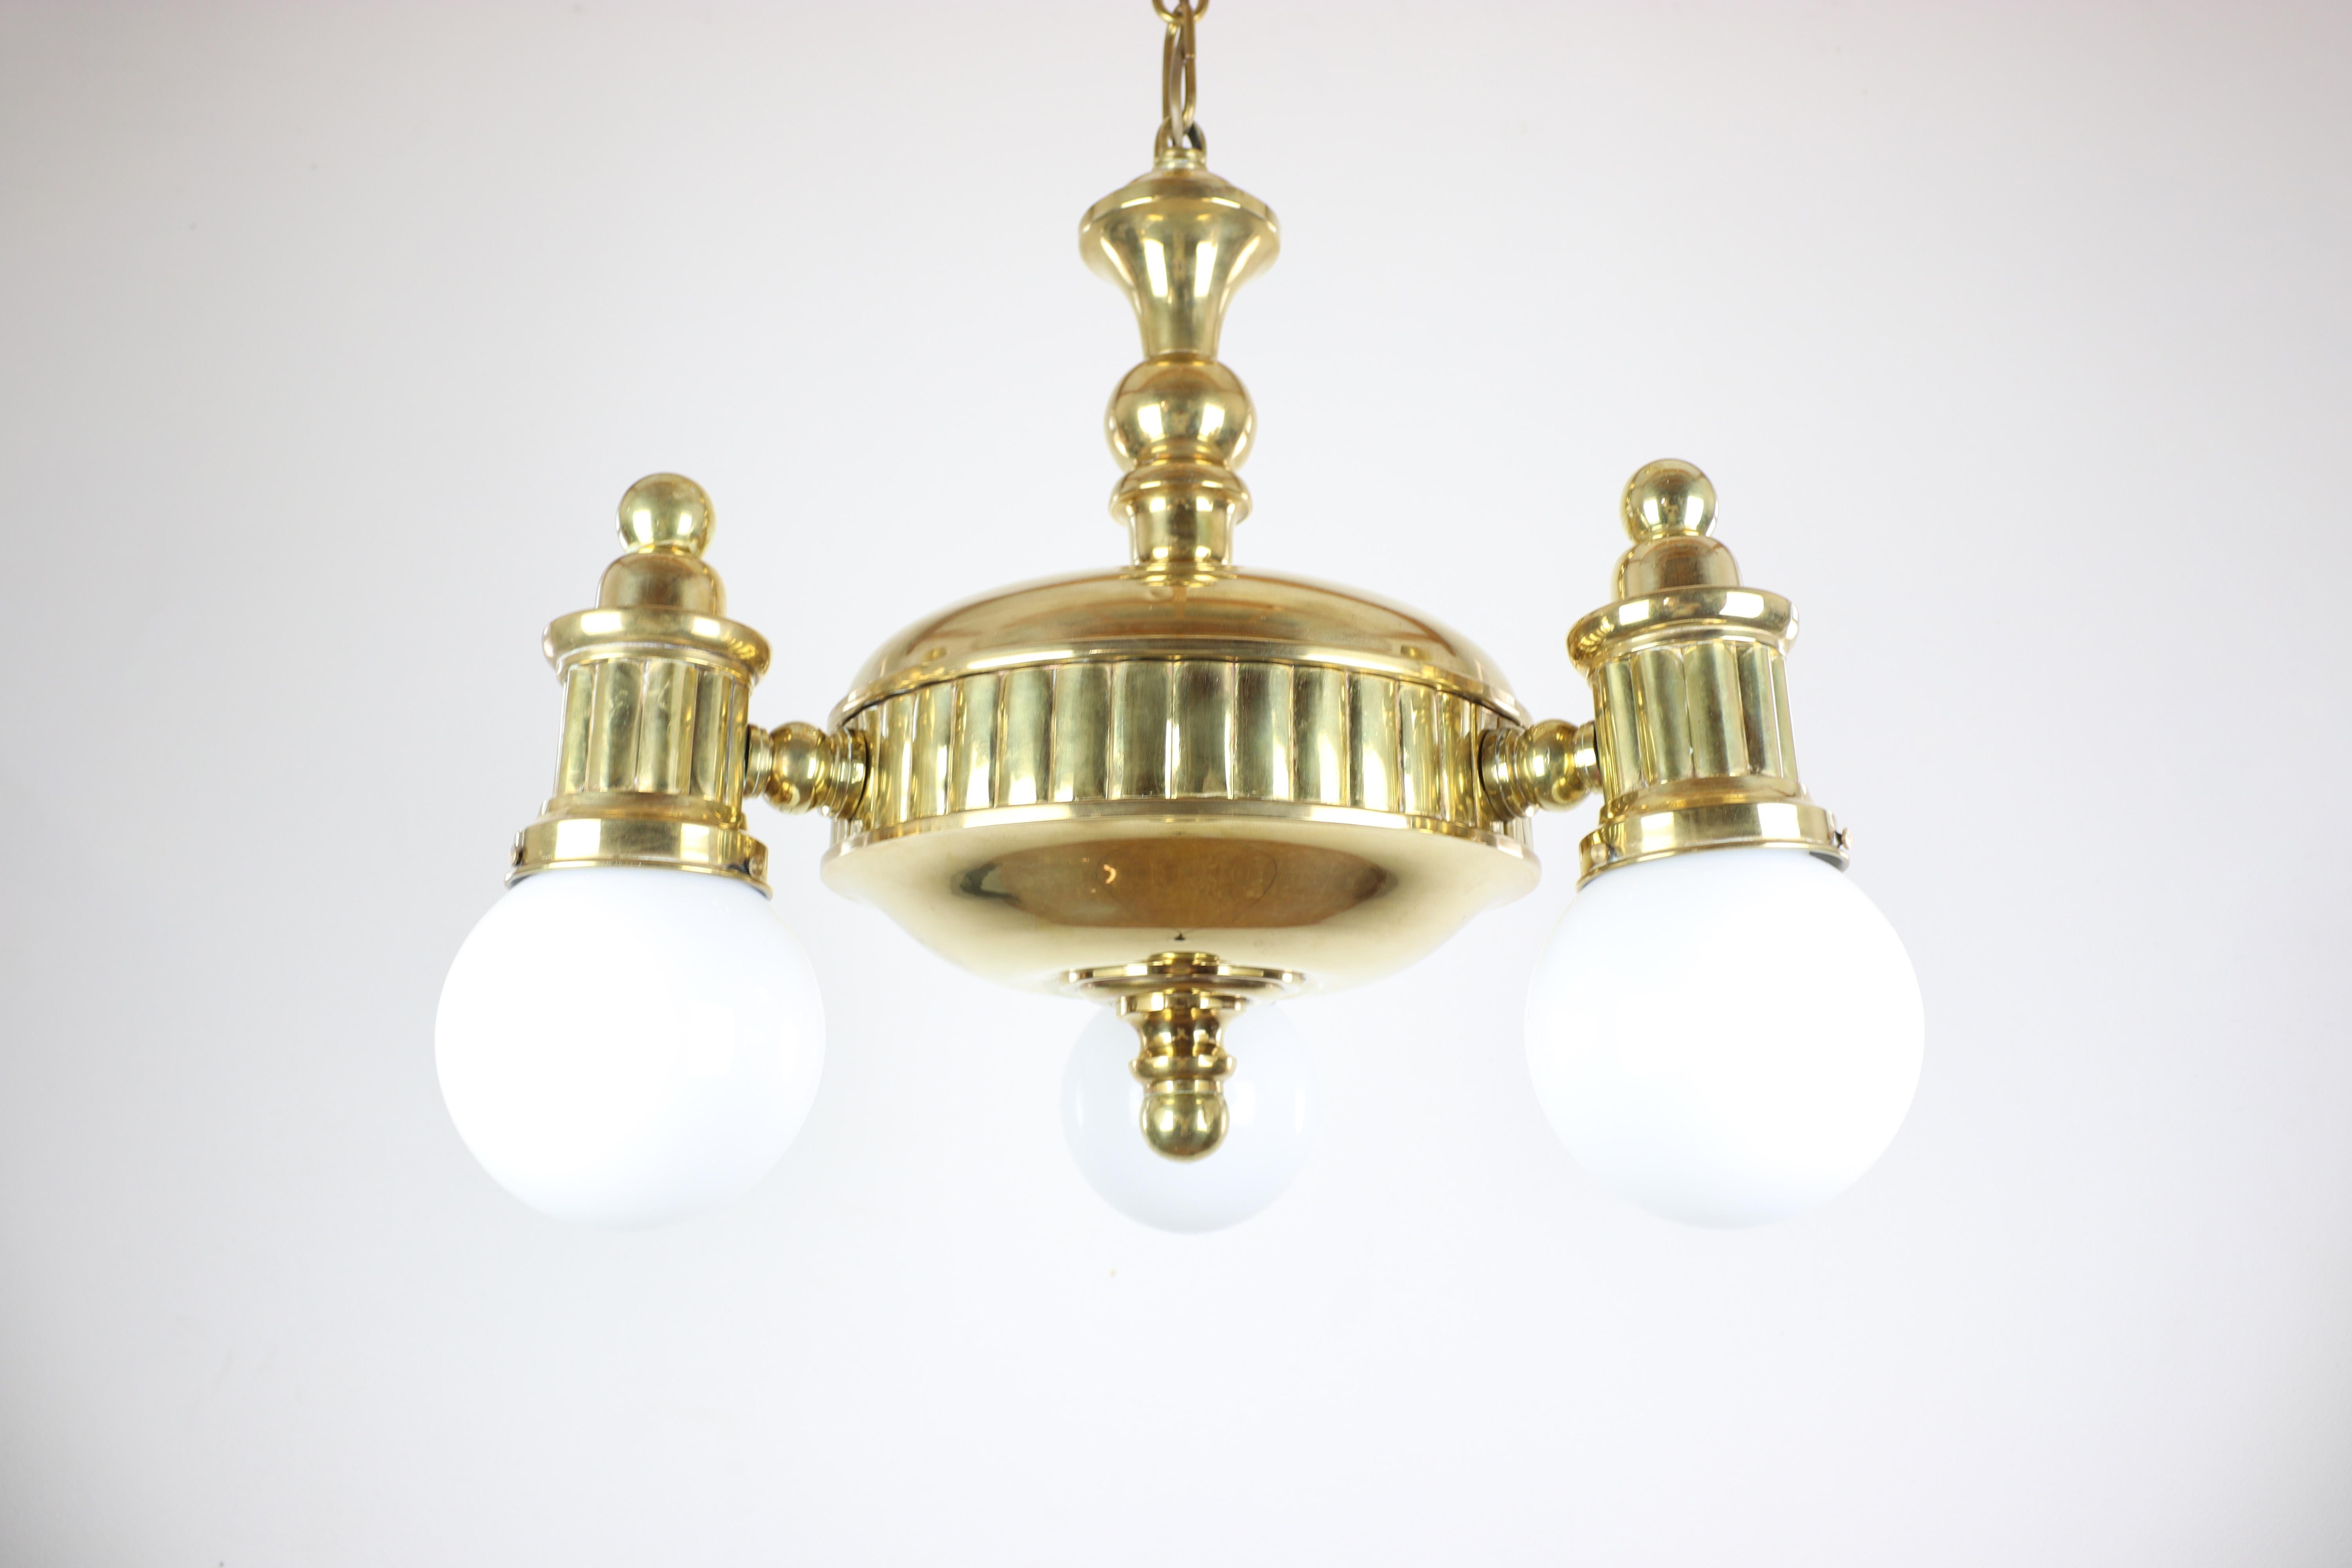 Exclusive Art Deco Chandelier with Swivel Arms 'Three-Arm Design' For Sale 4